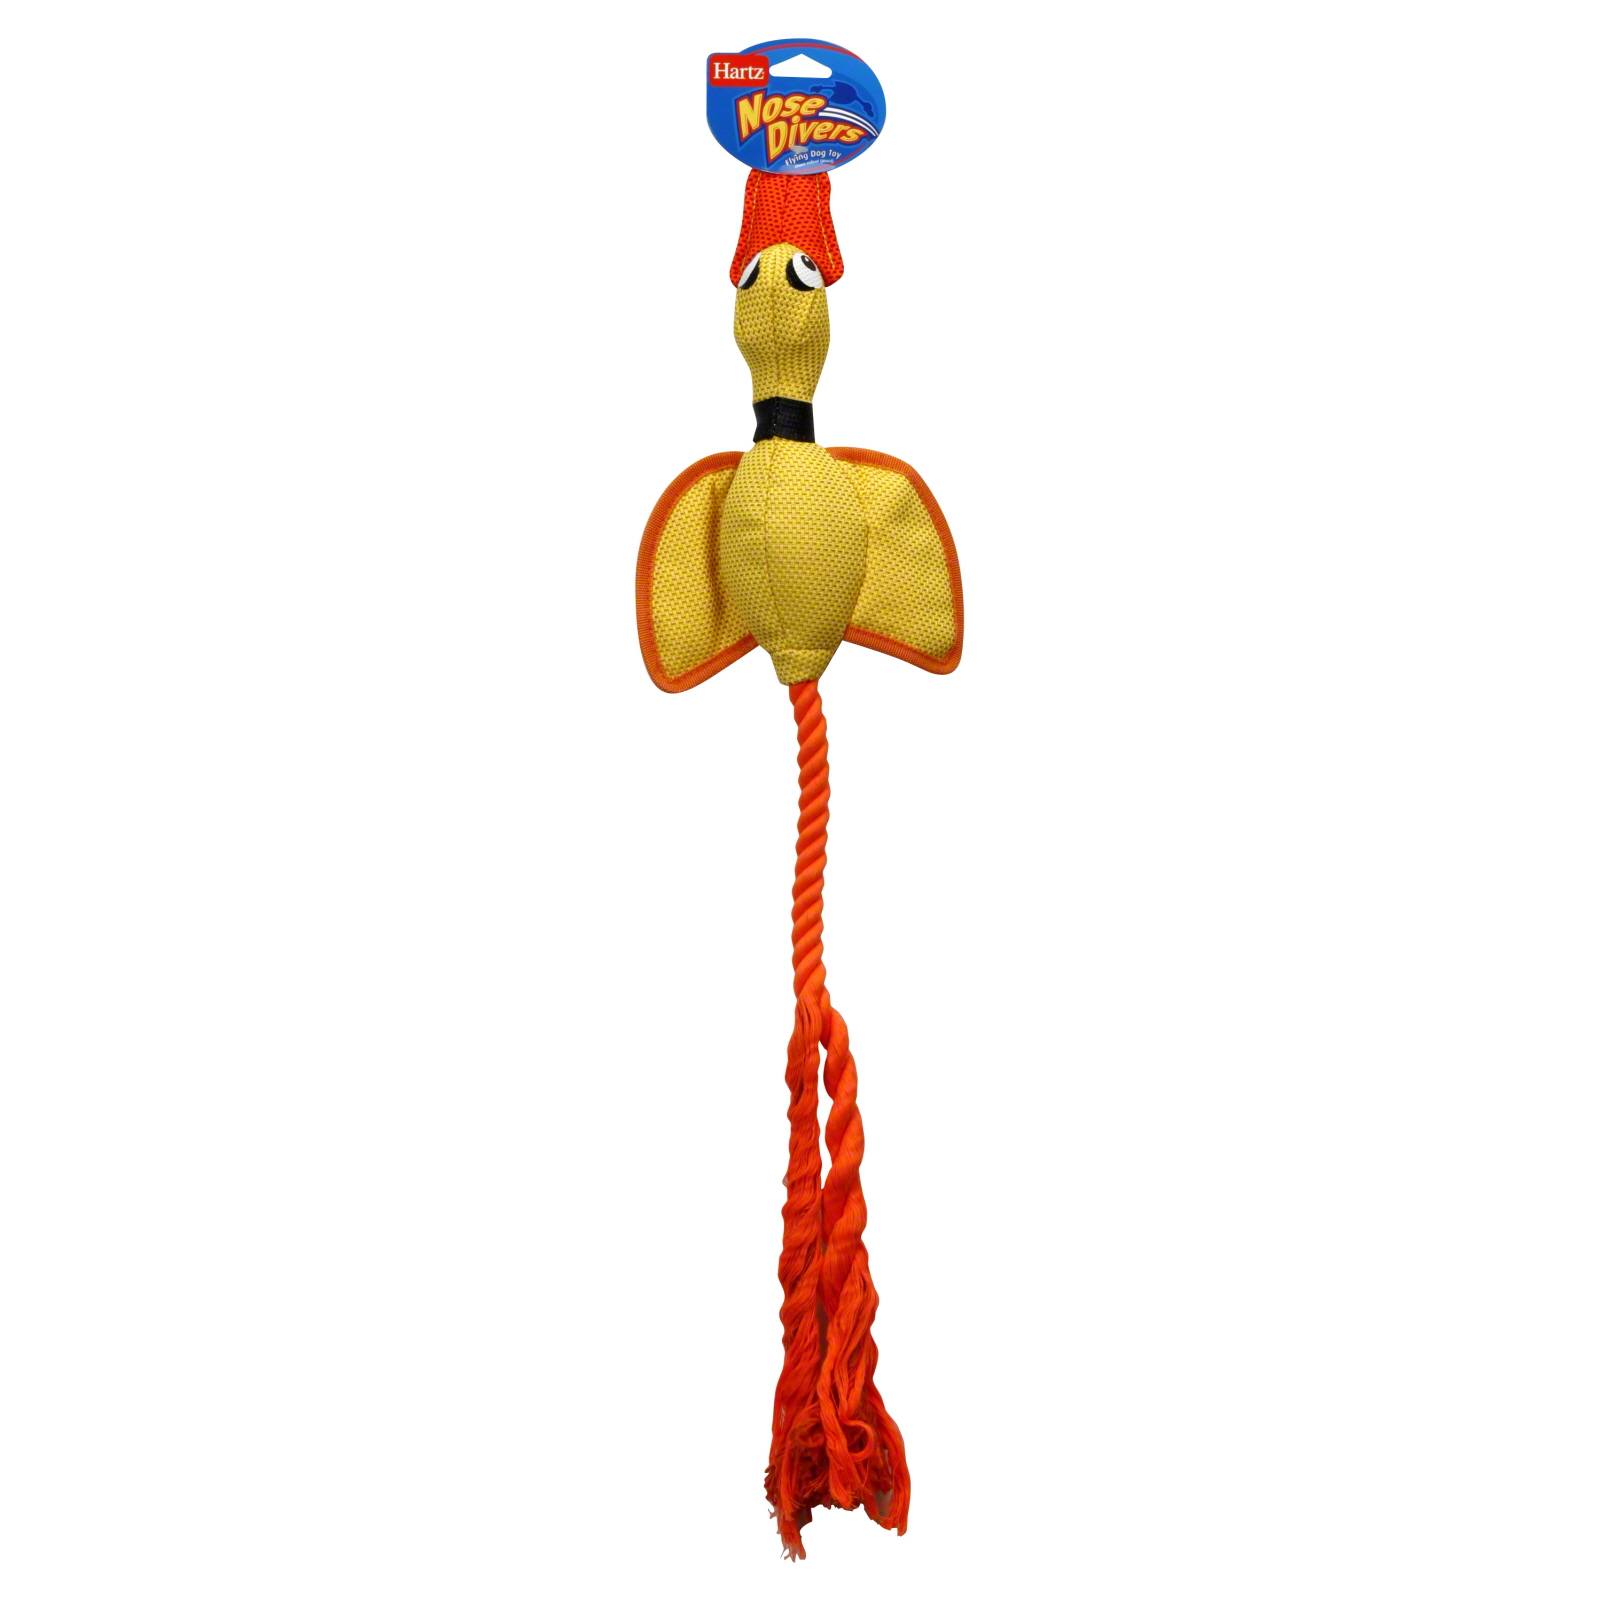 Hartz Nose Divers Flying Dog Toy, Duck, 1 toy